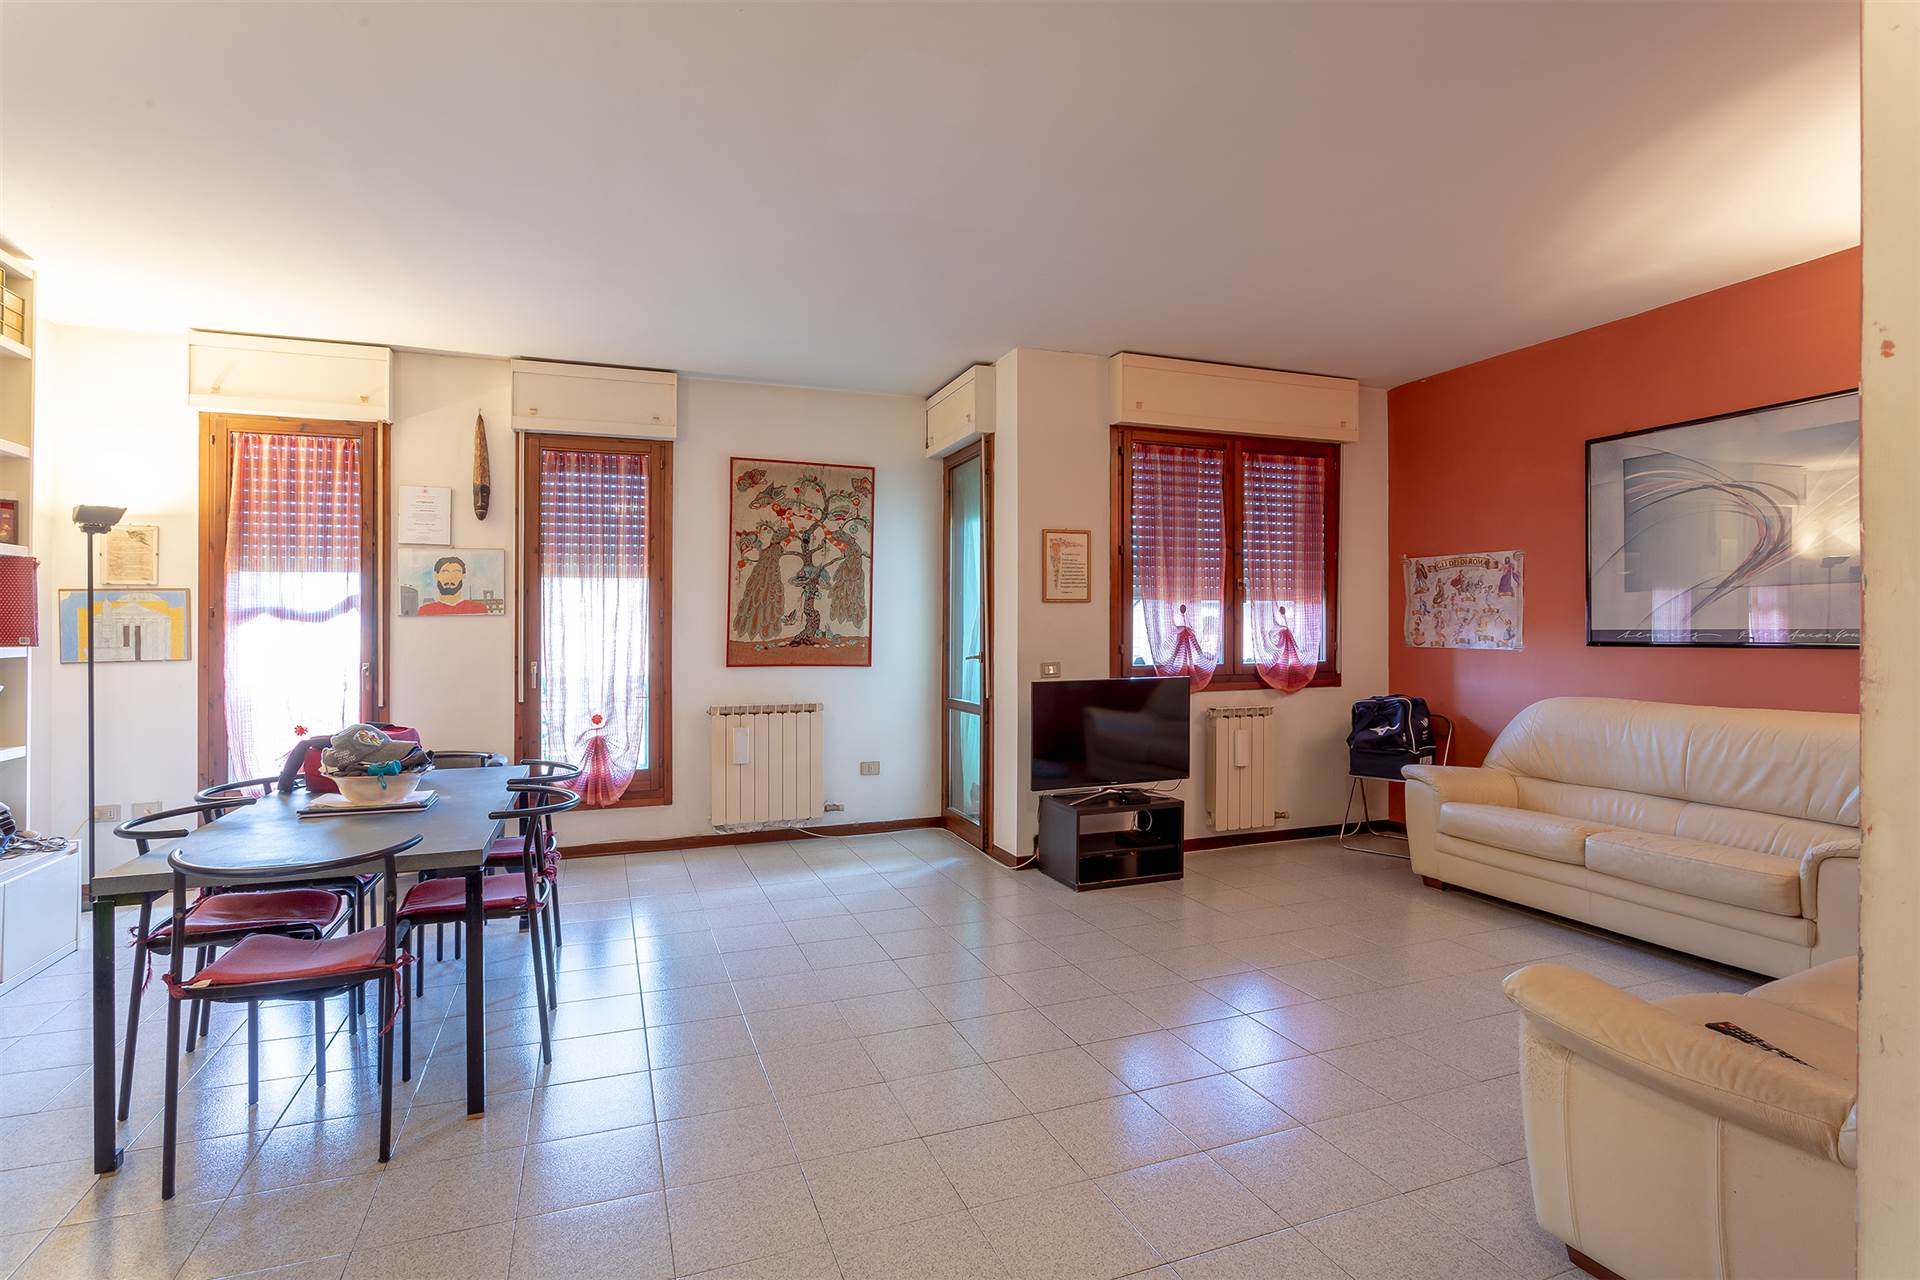 SAN DONNINO, CAMPI BISENZIO, Apartment for sale of 107 Sq. mt., Good condition, Heating Individual heating system, Energetic class: G, placed at 3° on 3, composed by: 4 Rooms, Separate kitchen, , 3 